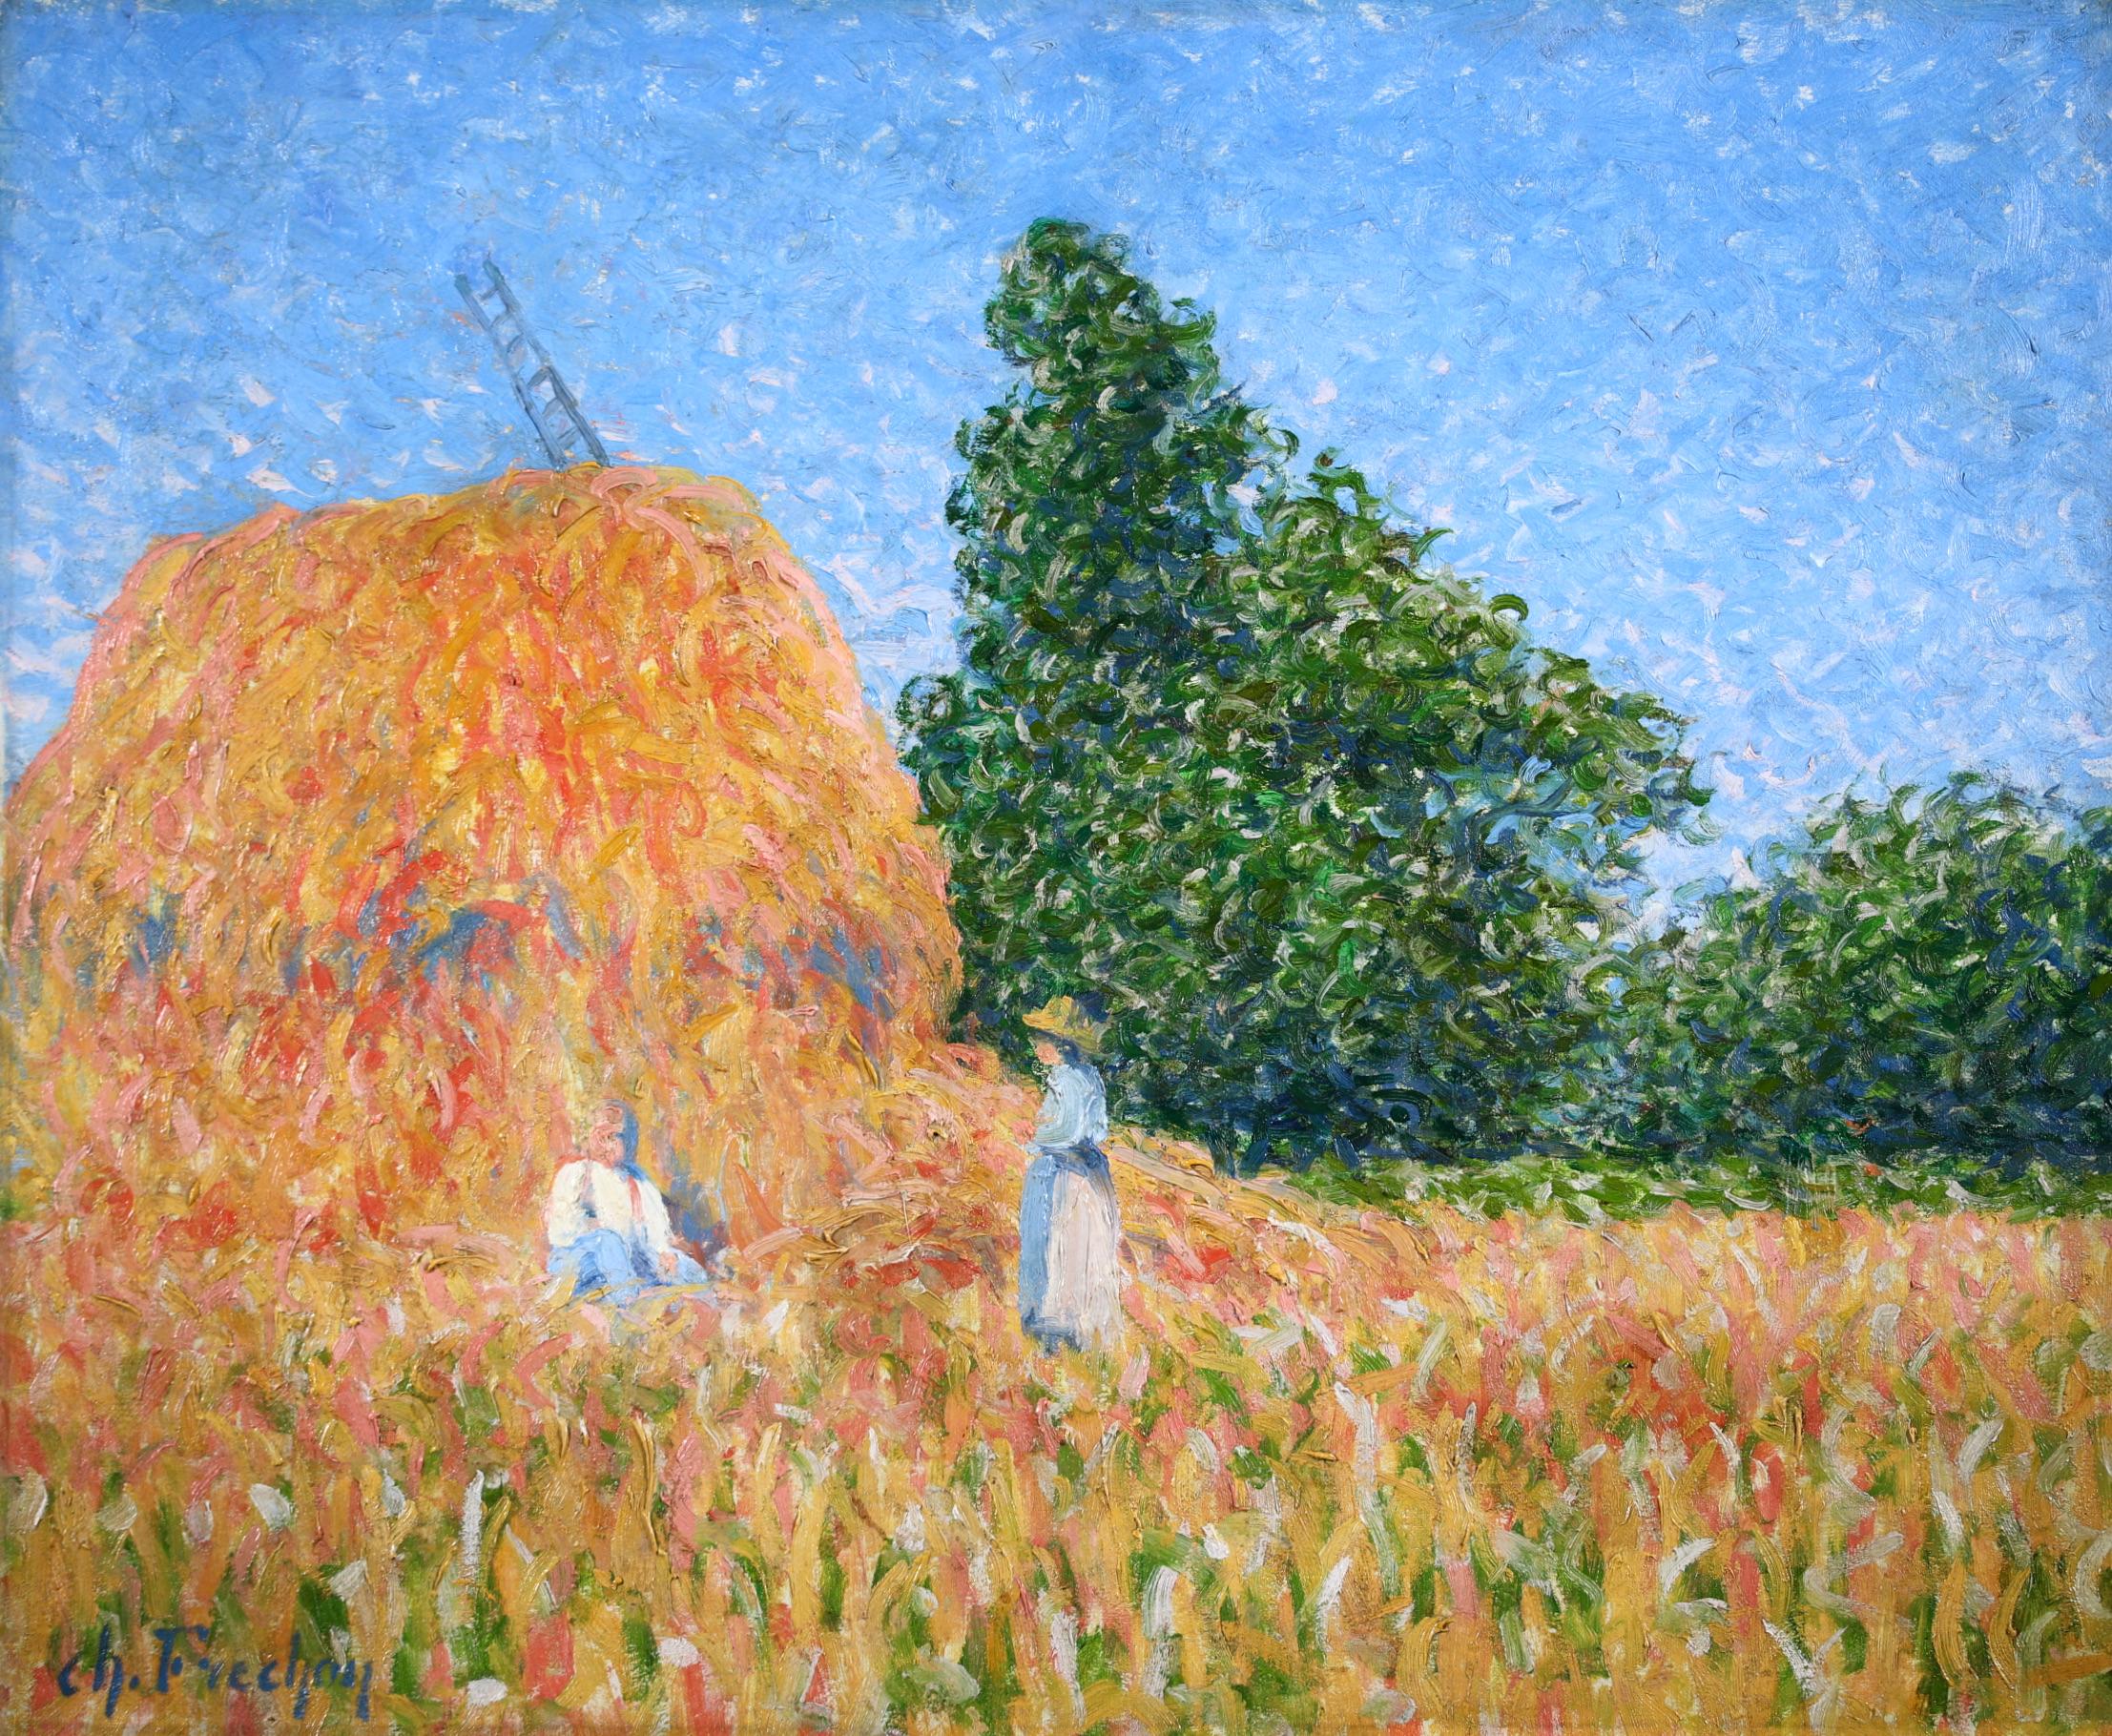 Signed figures in landscape oil on canvas by French post impressionist painter Charles Frechon. The work depicts two woman harvesting a field on a sunny summer's day. One woman is resting against a hay bale.

Signature:
Signed lower